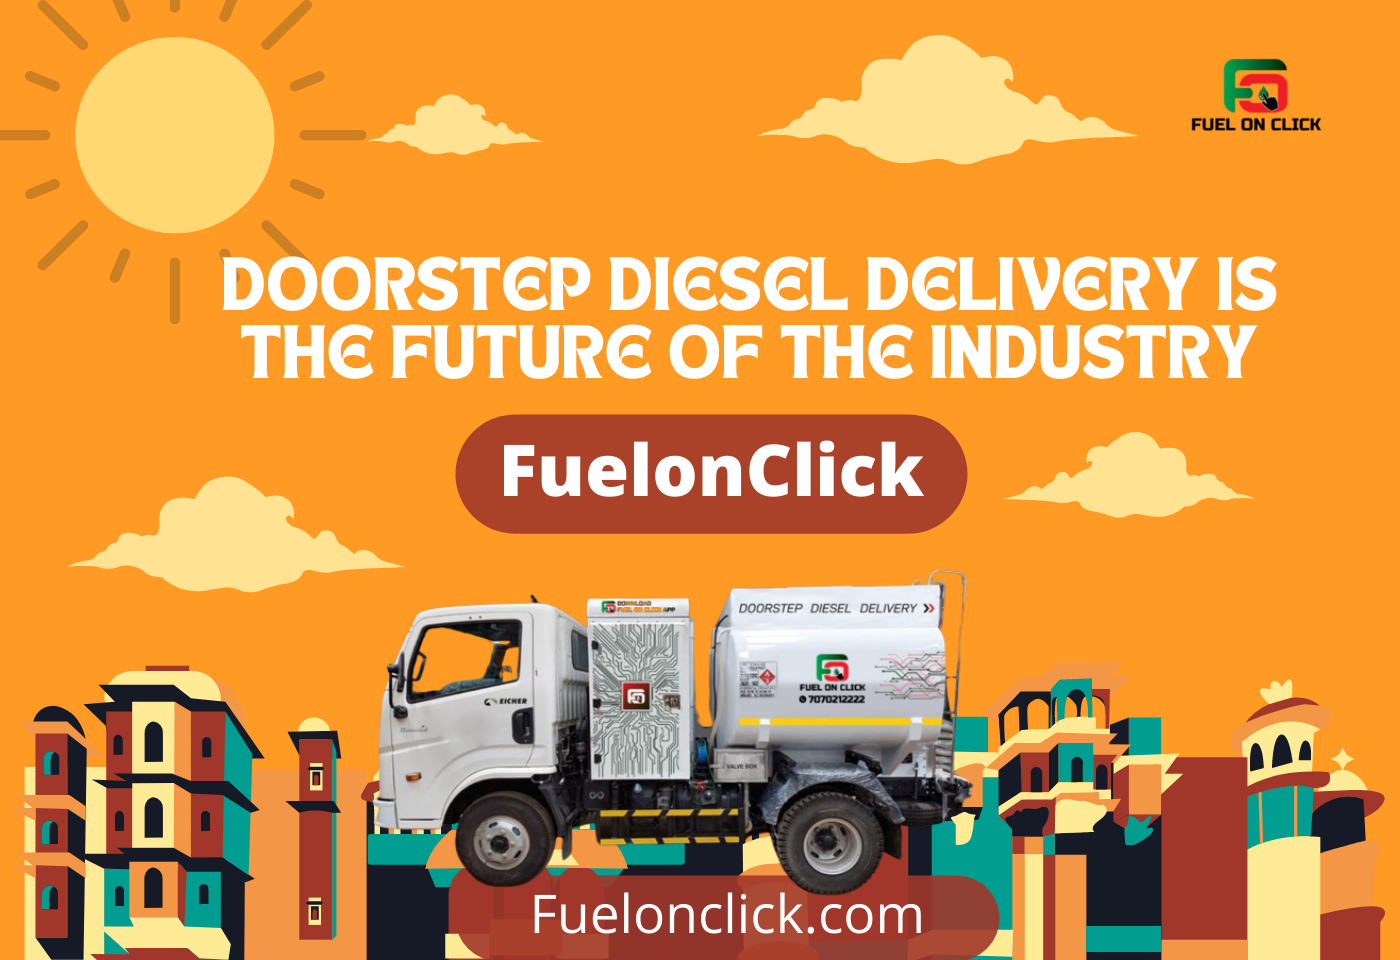 Doorstep Diesel Delivery Is the Future of The Industry